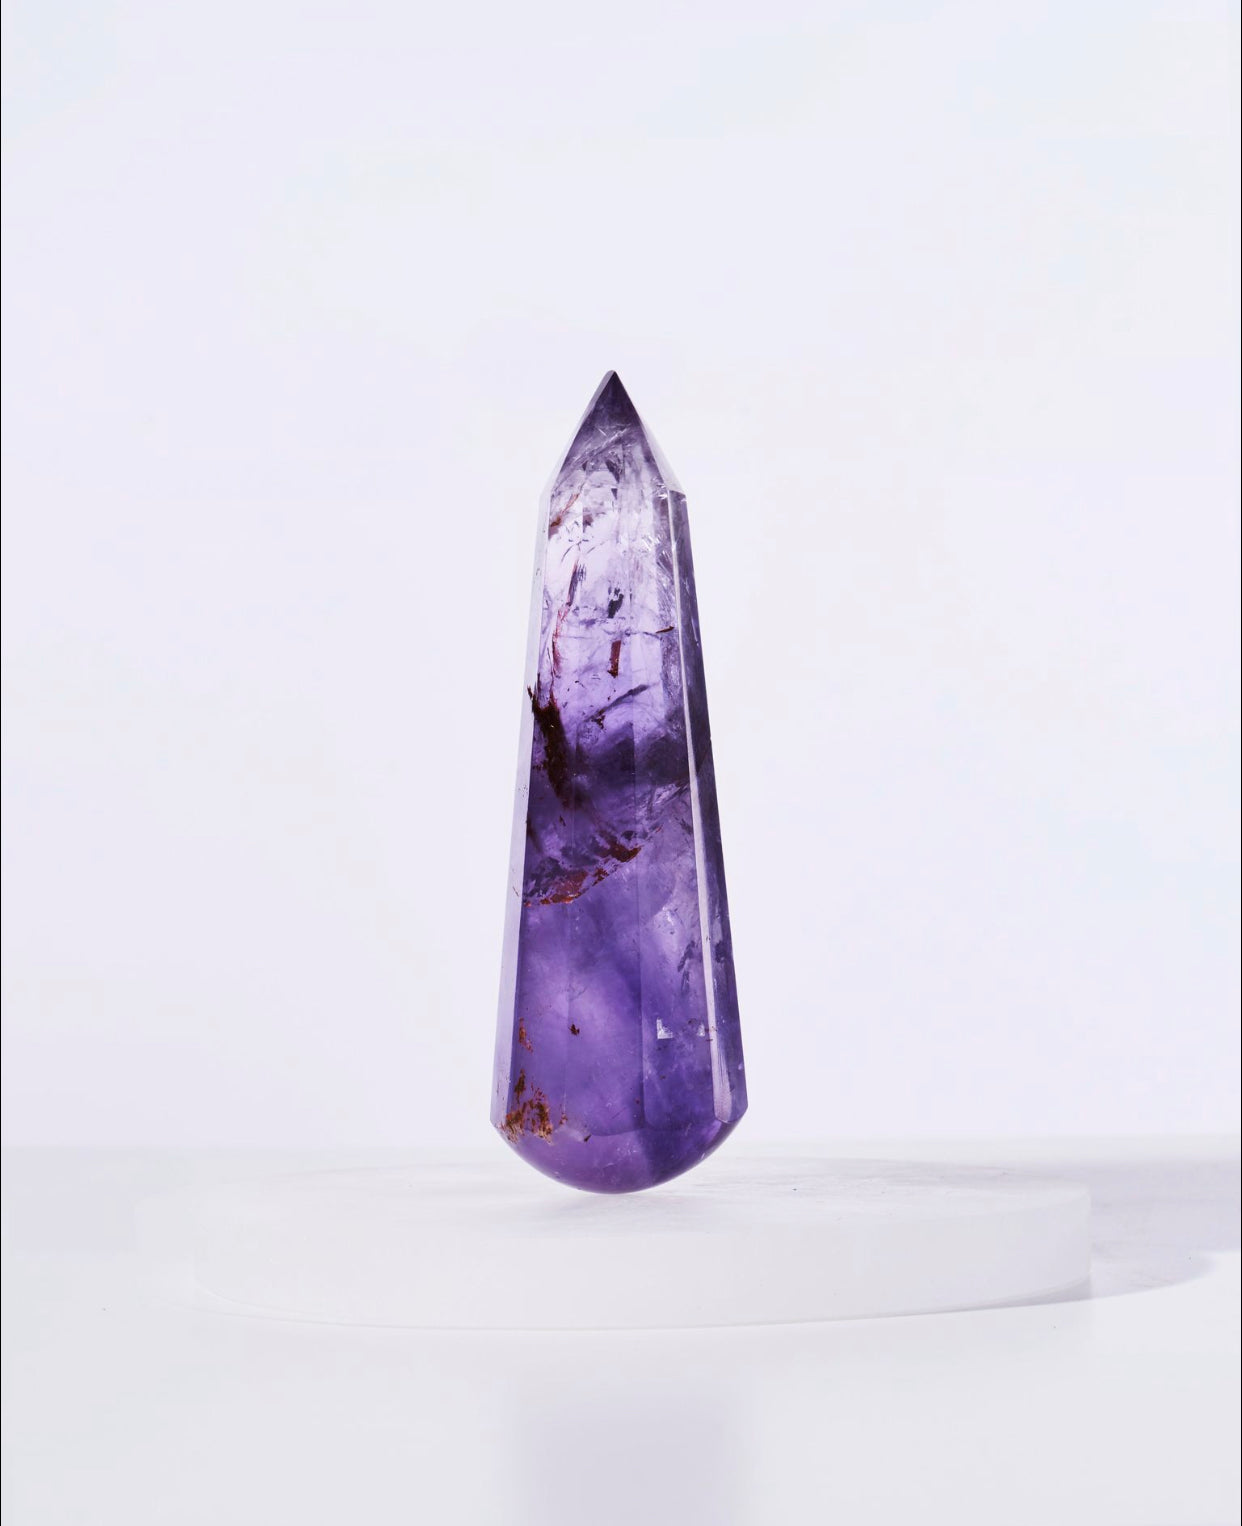 Experience Crystal Healing: Amethyst, Rose Quartz, and Clear Quartz Vogel Wands for Relaxation and Balance. Hand-Carved Massage Tools for Reiki and Reflexology.